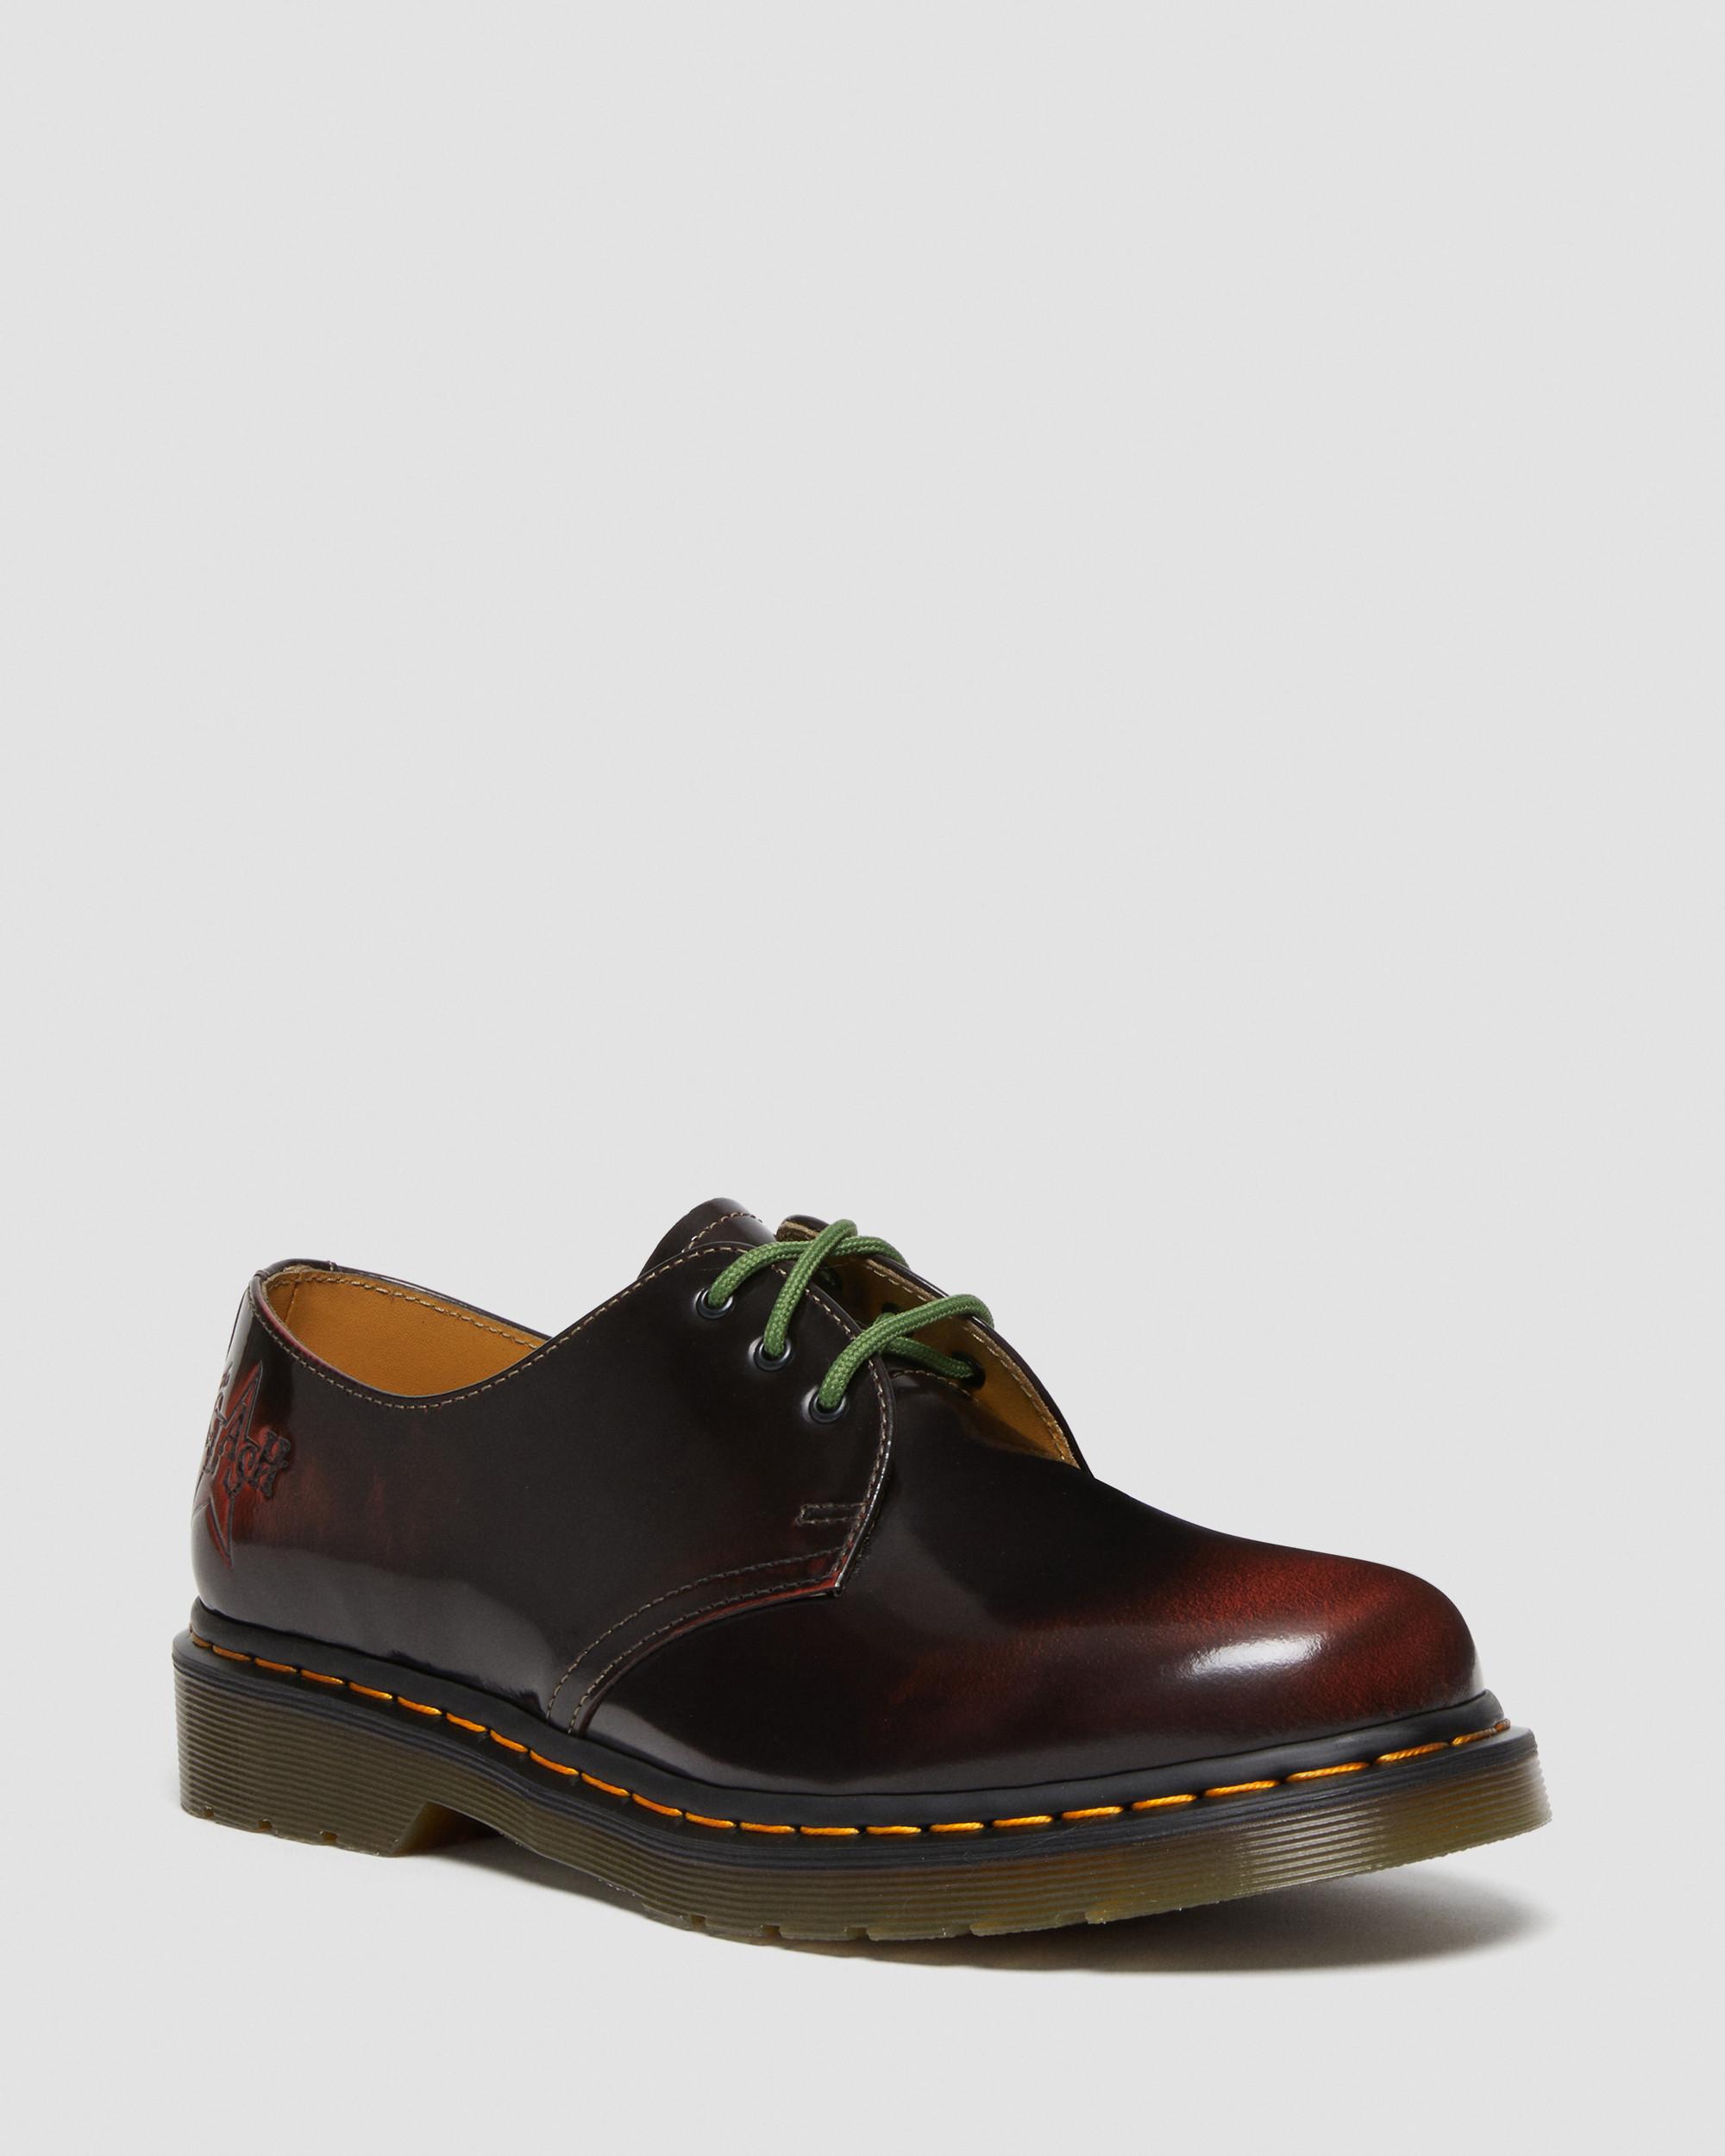 1461 THE CLASH Arcadia Leather Shoes in Cherry Red | Dr. Martens